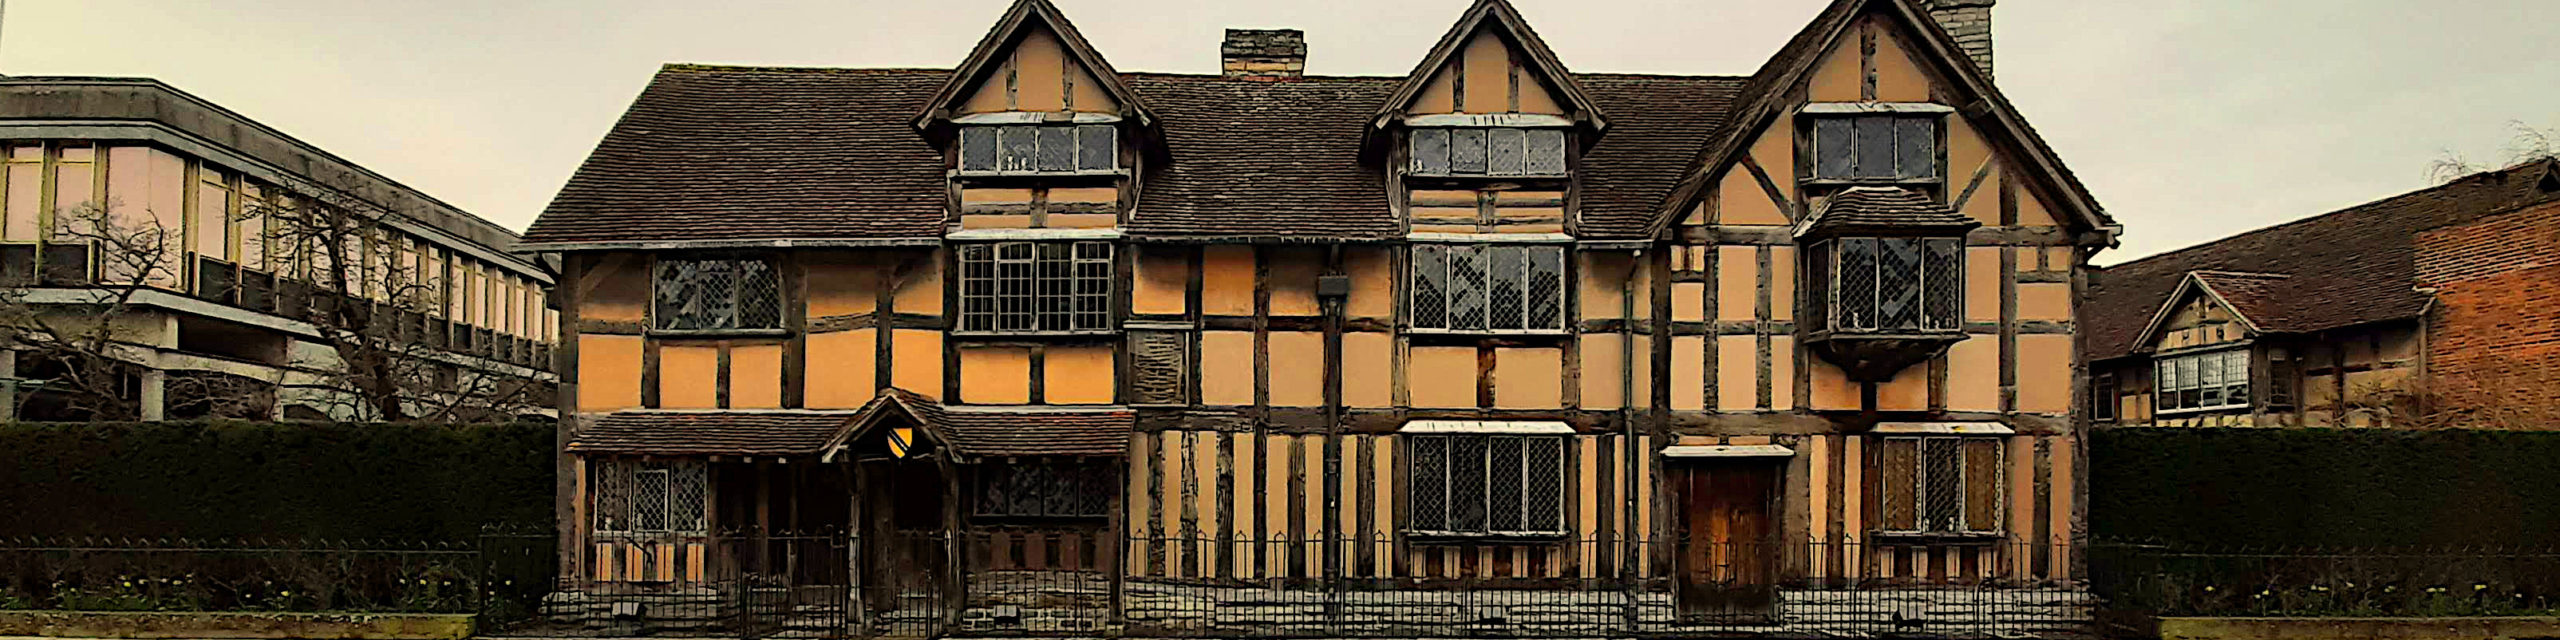 Discover the secrets of Stratford with Stratford Town Walk, and get a Go Cotswolds coupon code for 10% off too